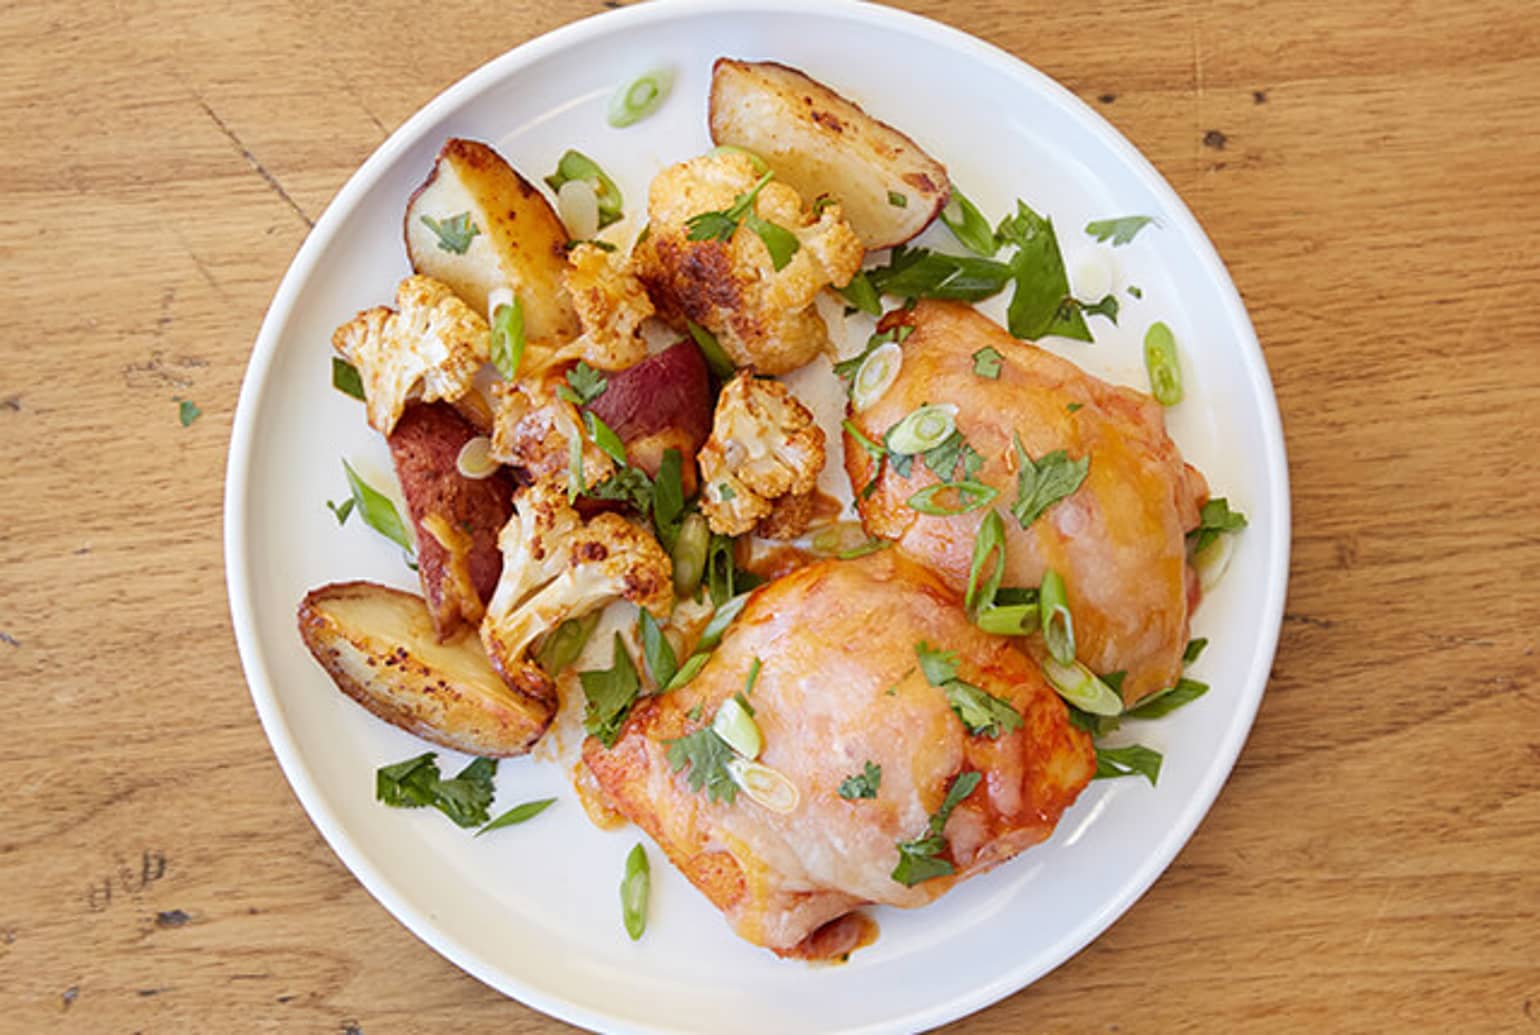 Mexican Chili-Roasted Chicken, Cauliflower, Potatoes and Cilantro